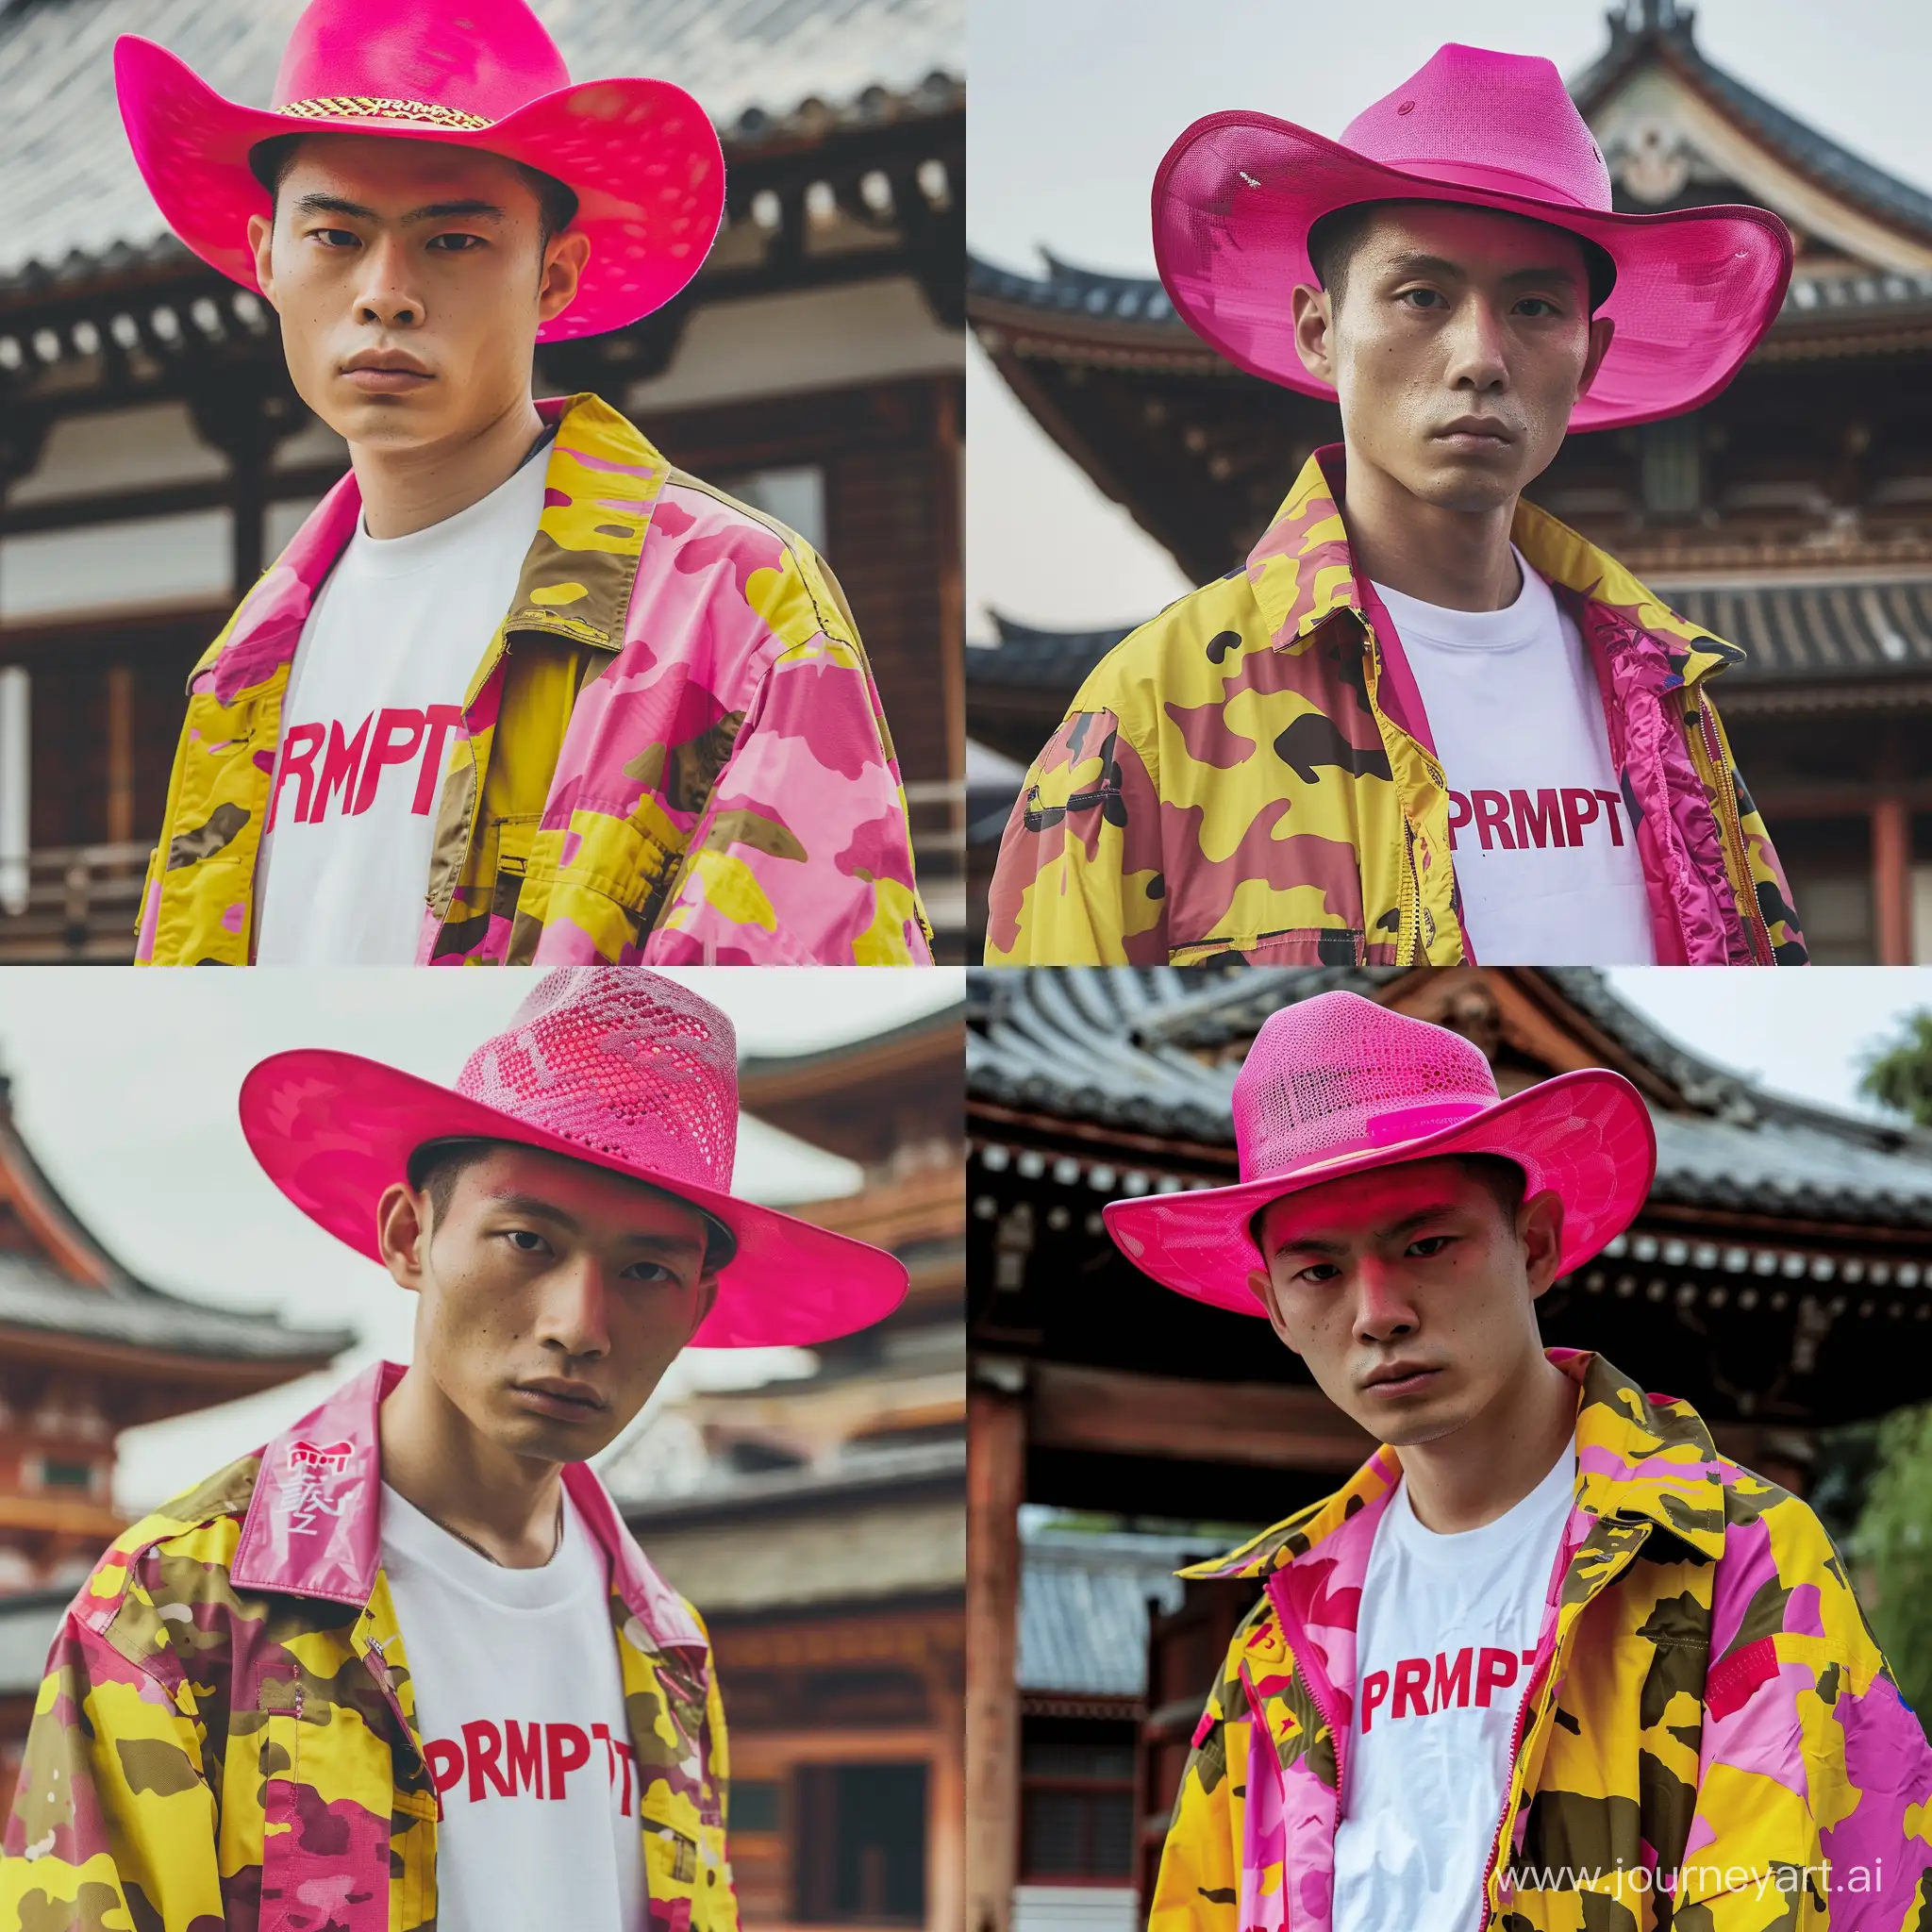 Asian-Male-Editorial-Fashion-Portrait-with-Neon-Pink-Cowboy-Hat-and-Vibrant-Yellow-Jacket-Against-Japanese-Temple-Backdrop